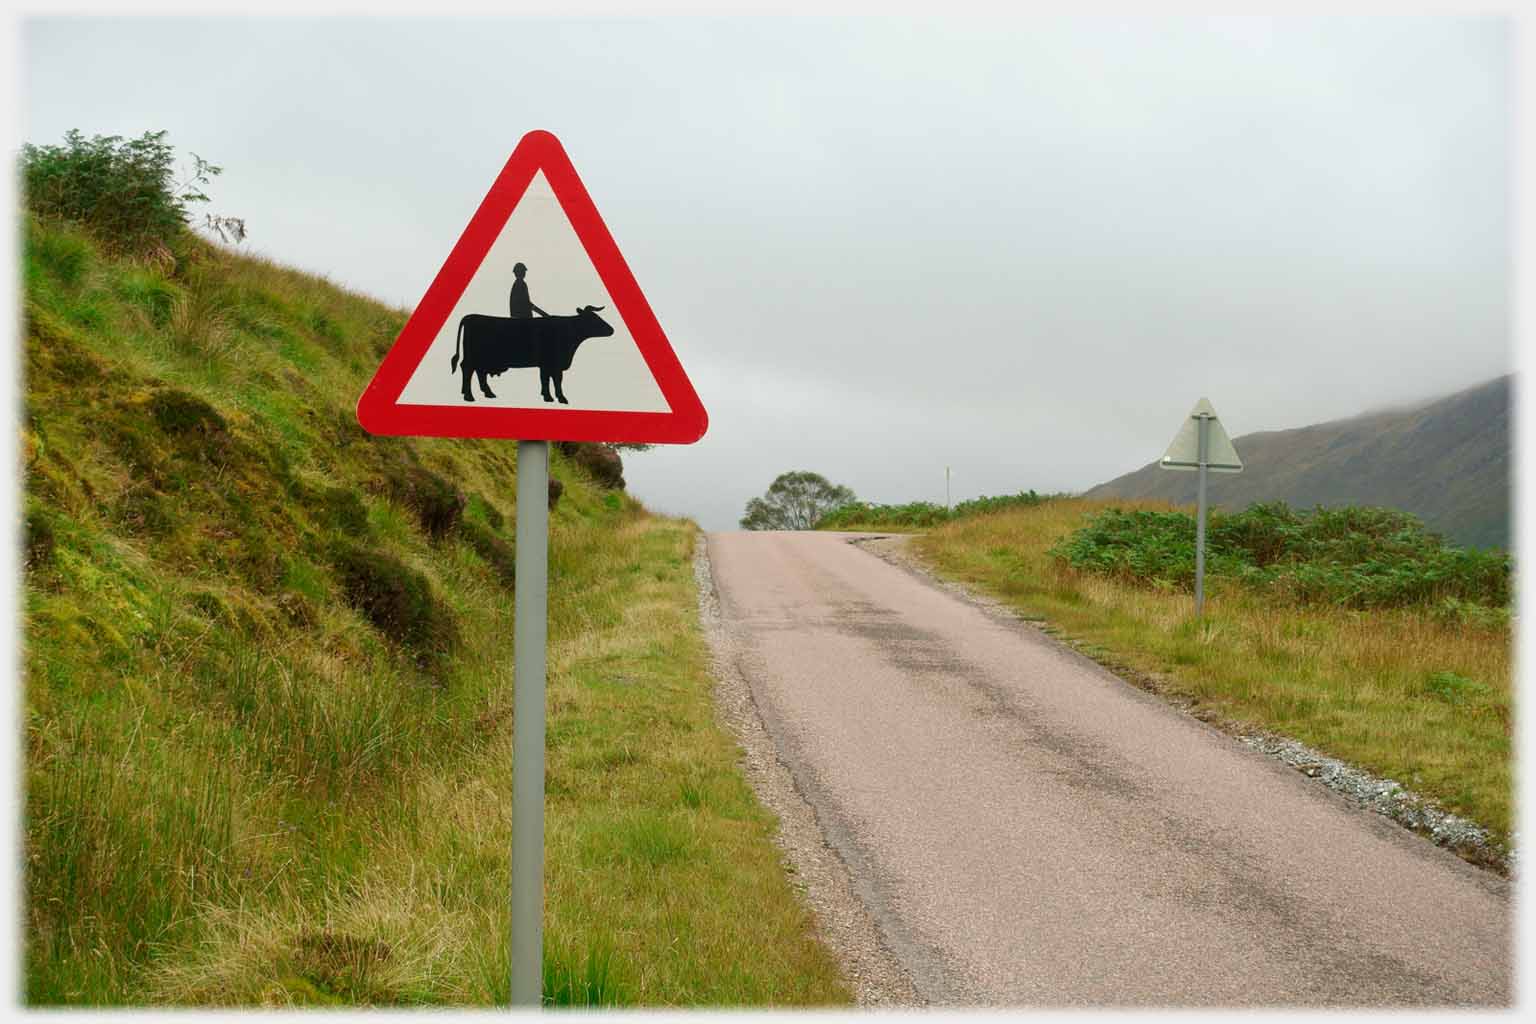 Cattle warning sign with rider and udder painted on it.